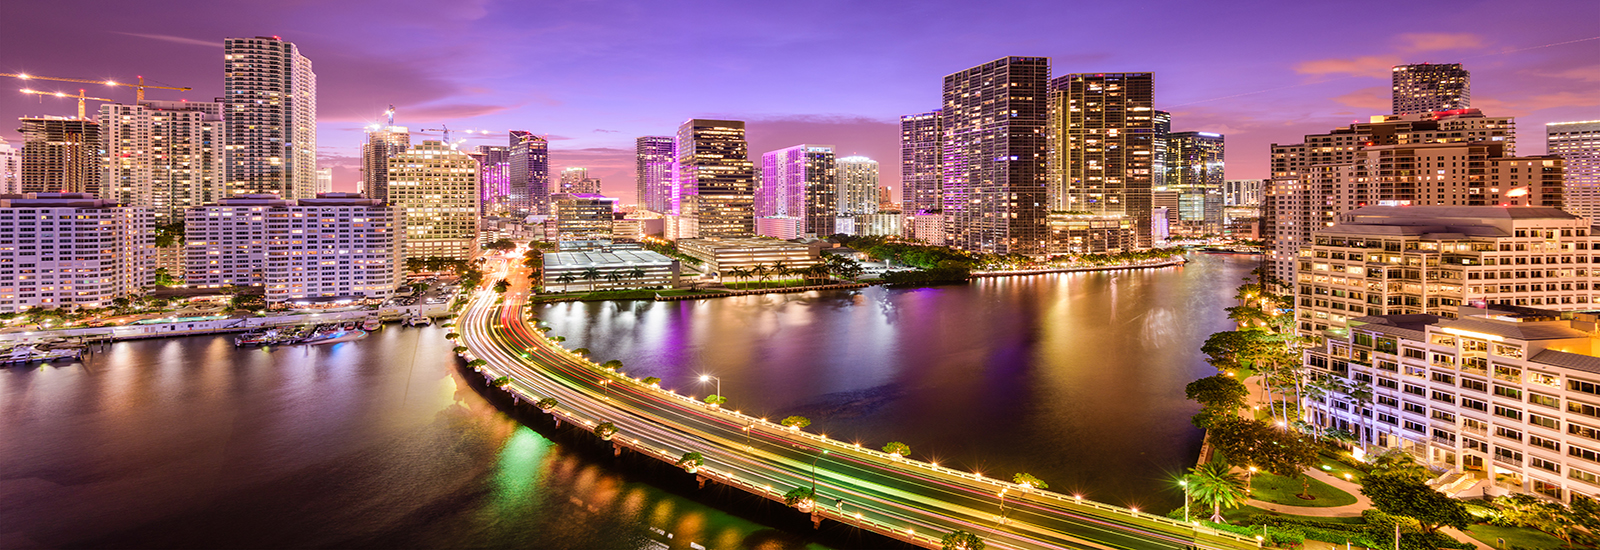 A stock photo of the cityscape of downtown Miami, Florida.